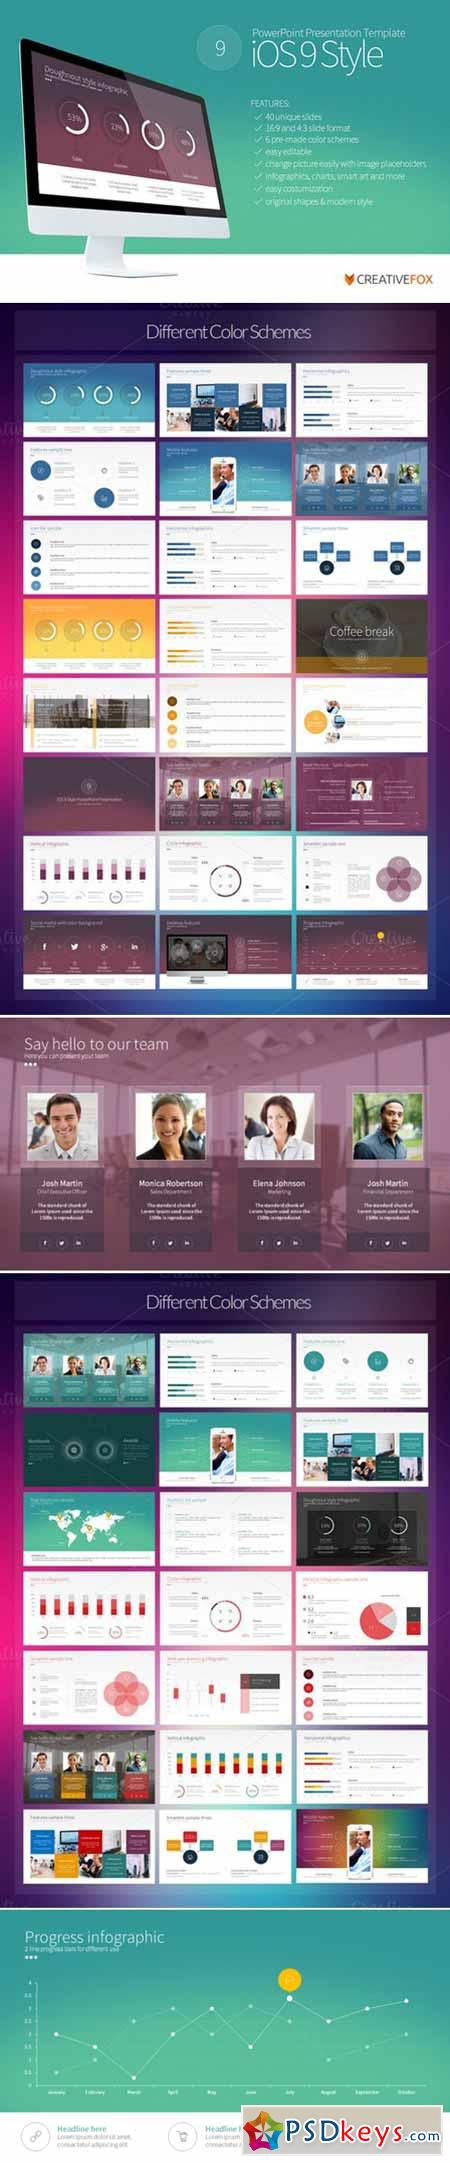 iOS 9 Style PowerPoint Template 386459